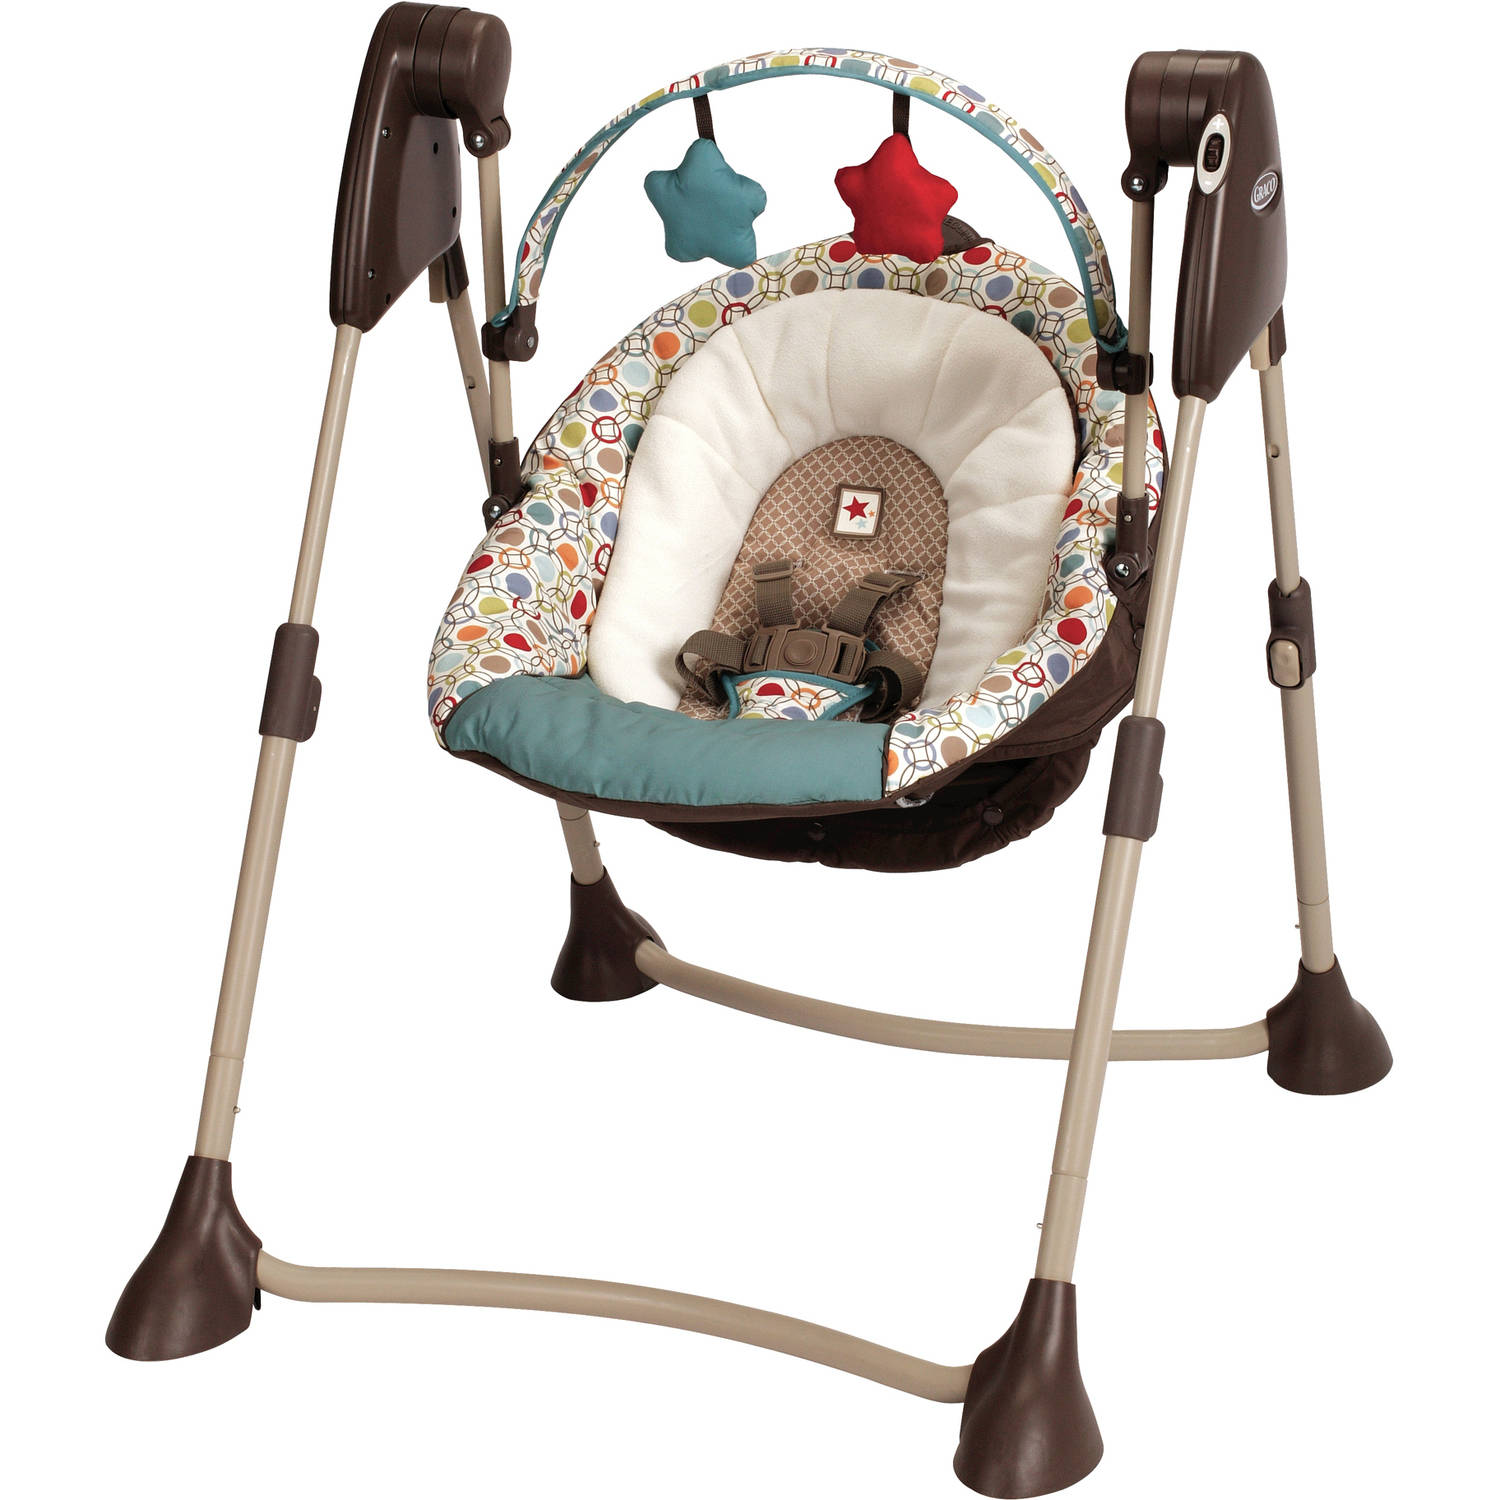 Graco Swing By Me Twister - image 3 of 6